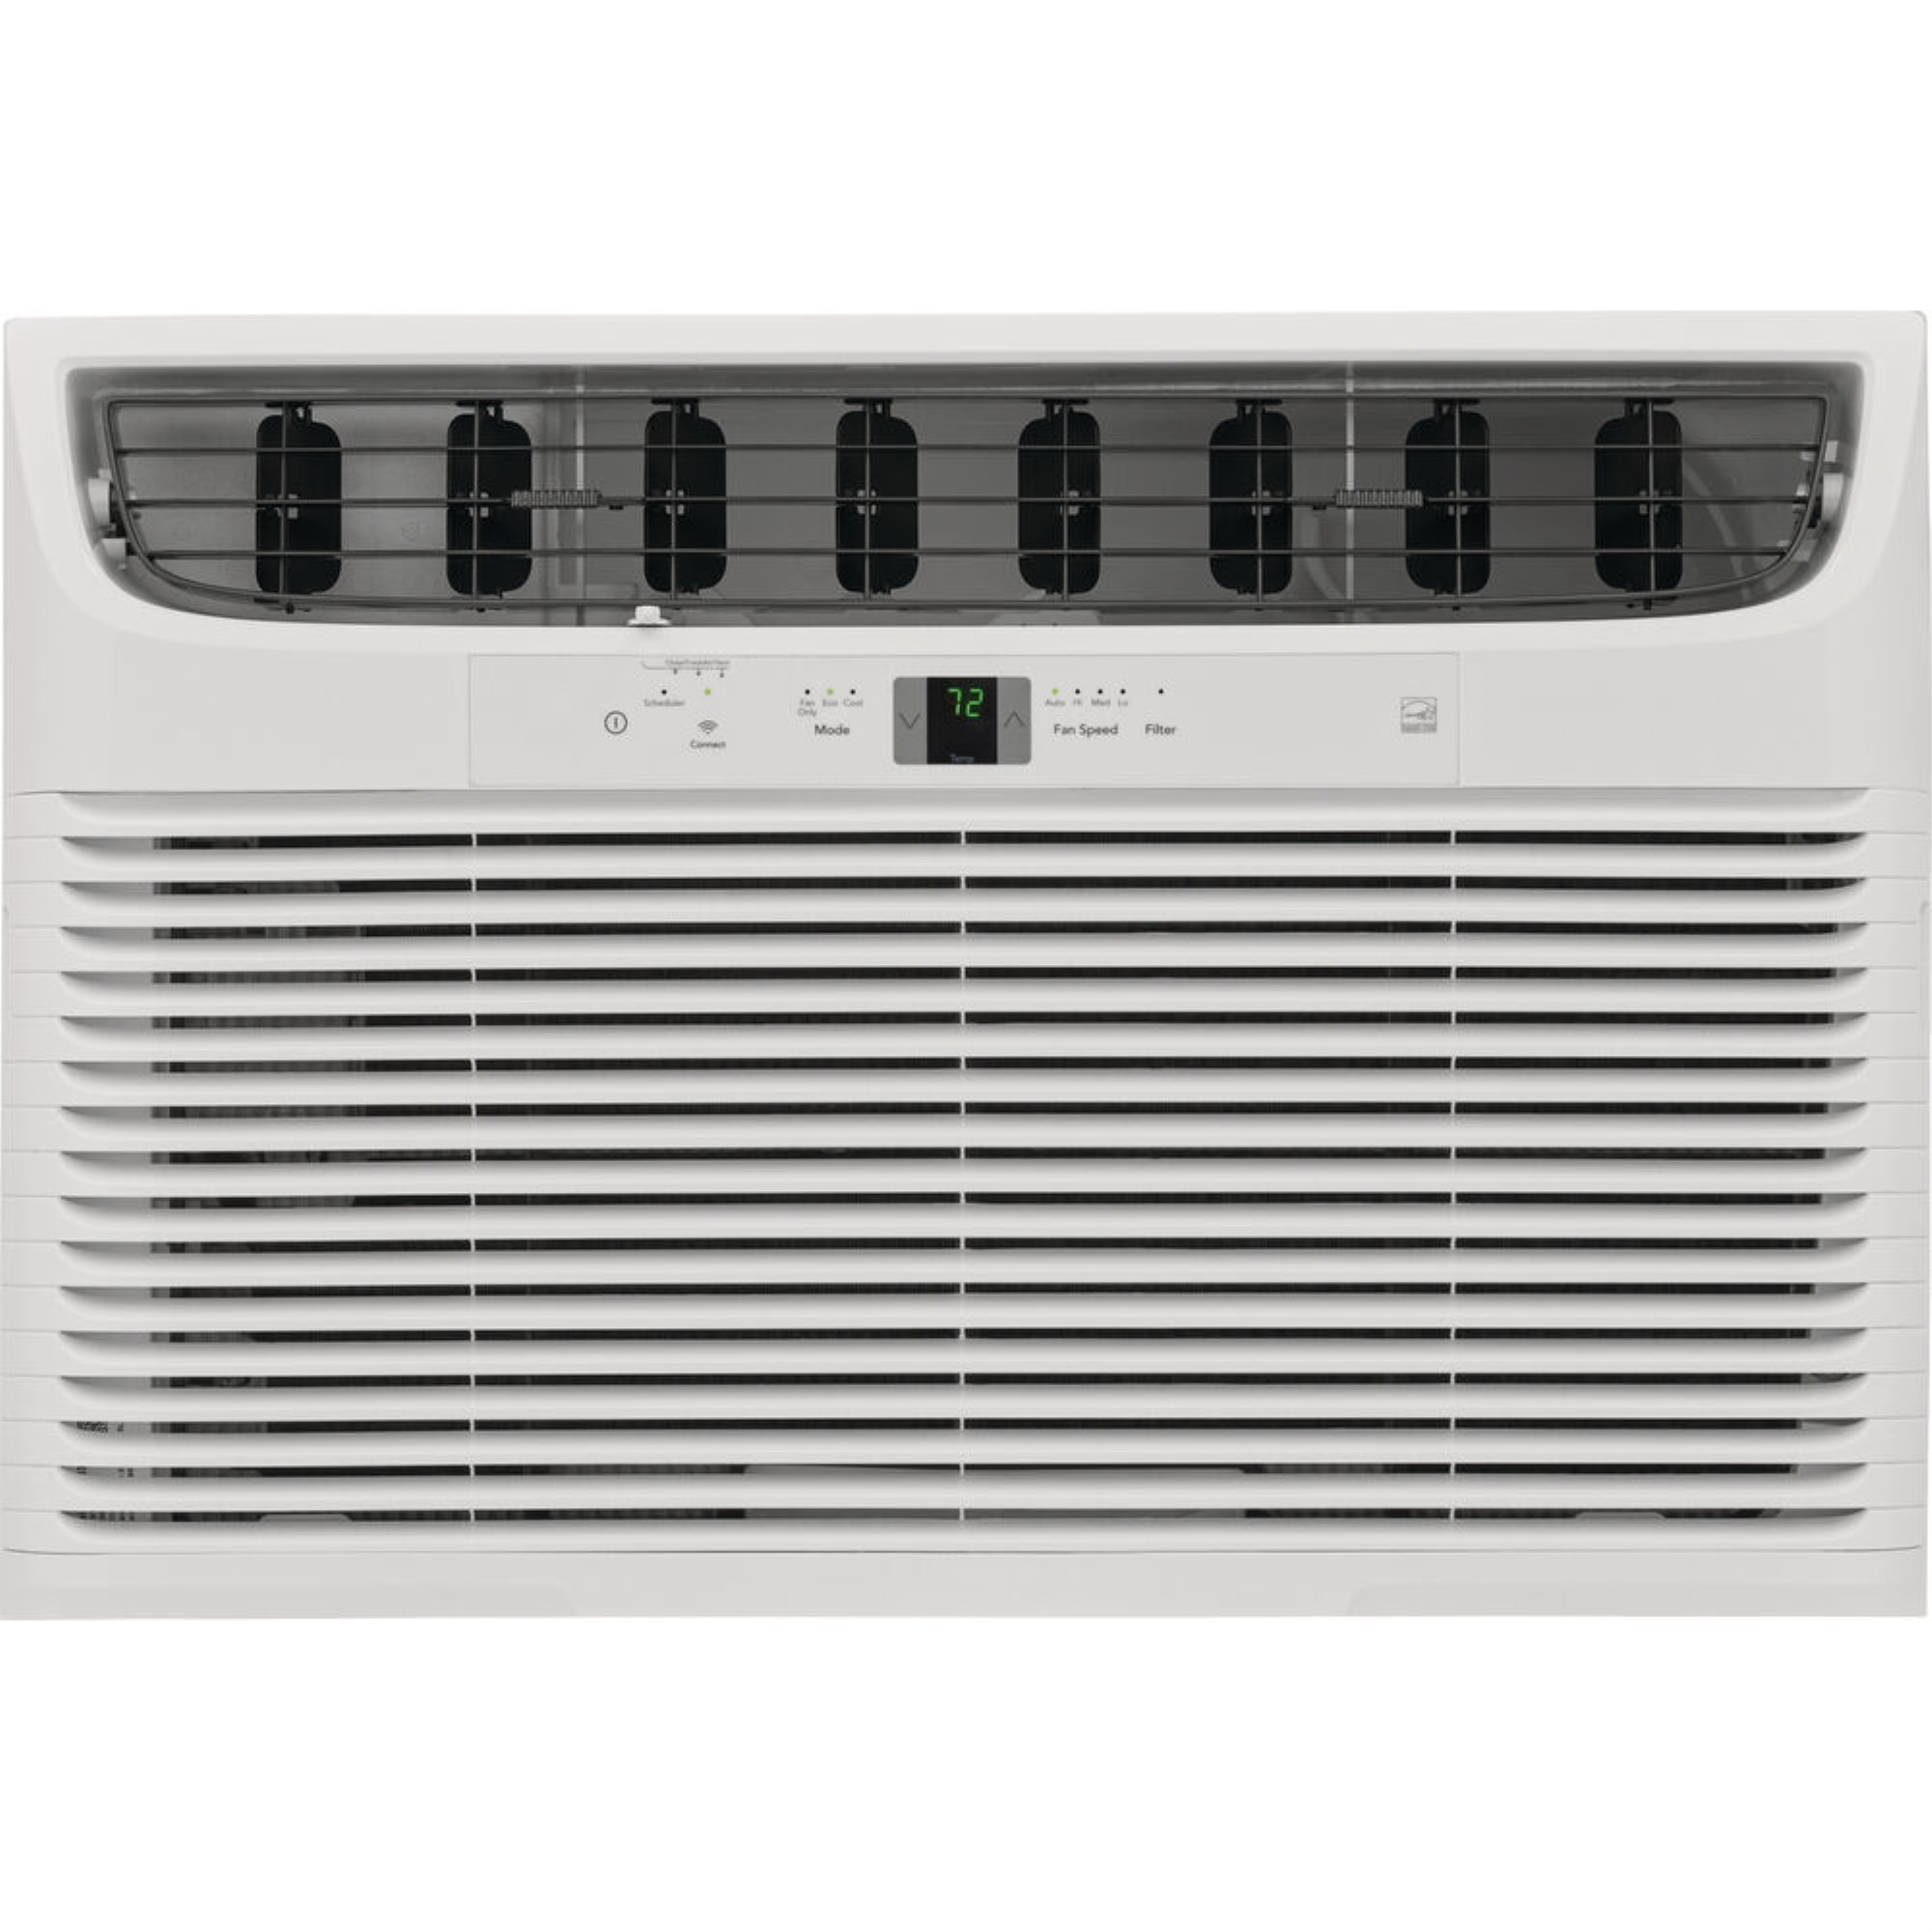 FRIGAC Frigidaire 25,000 BTU Energy Star Window Air Conditioner with Wi-Fi Connection and Slide Out Chassis, FHWW253WC2